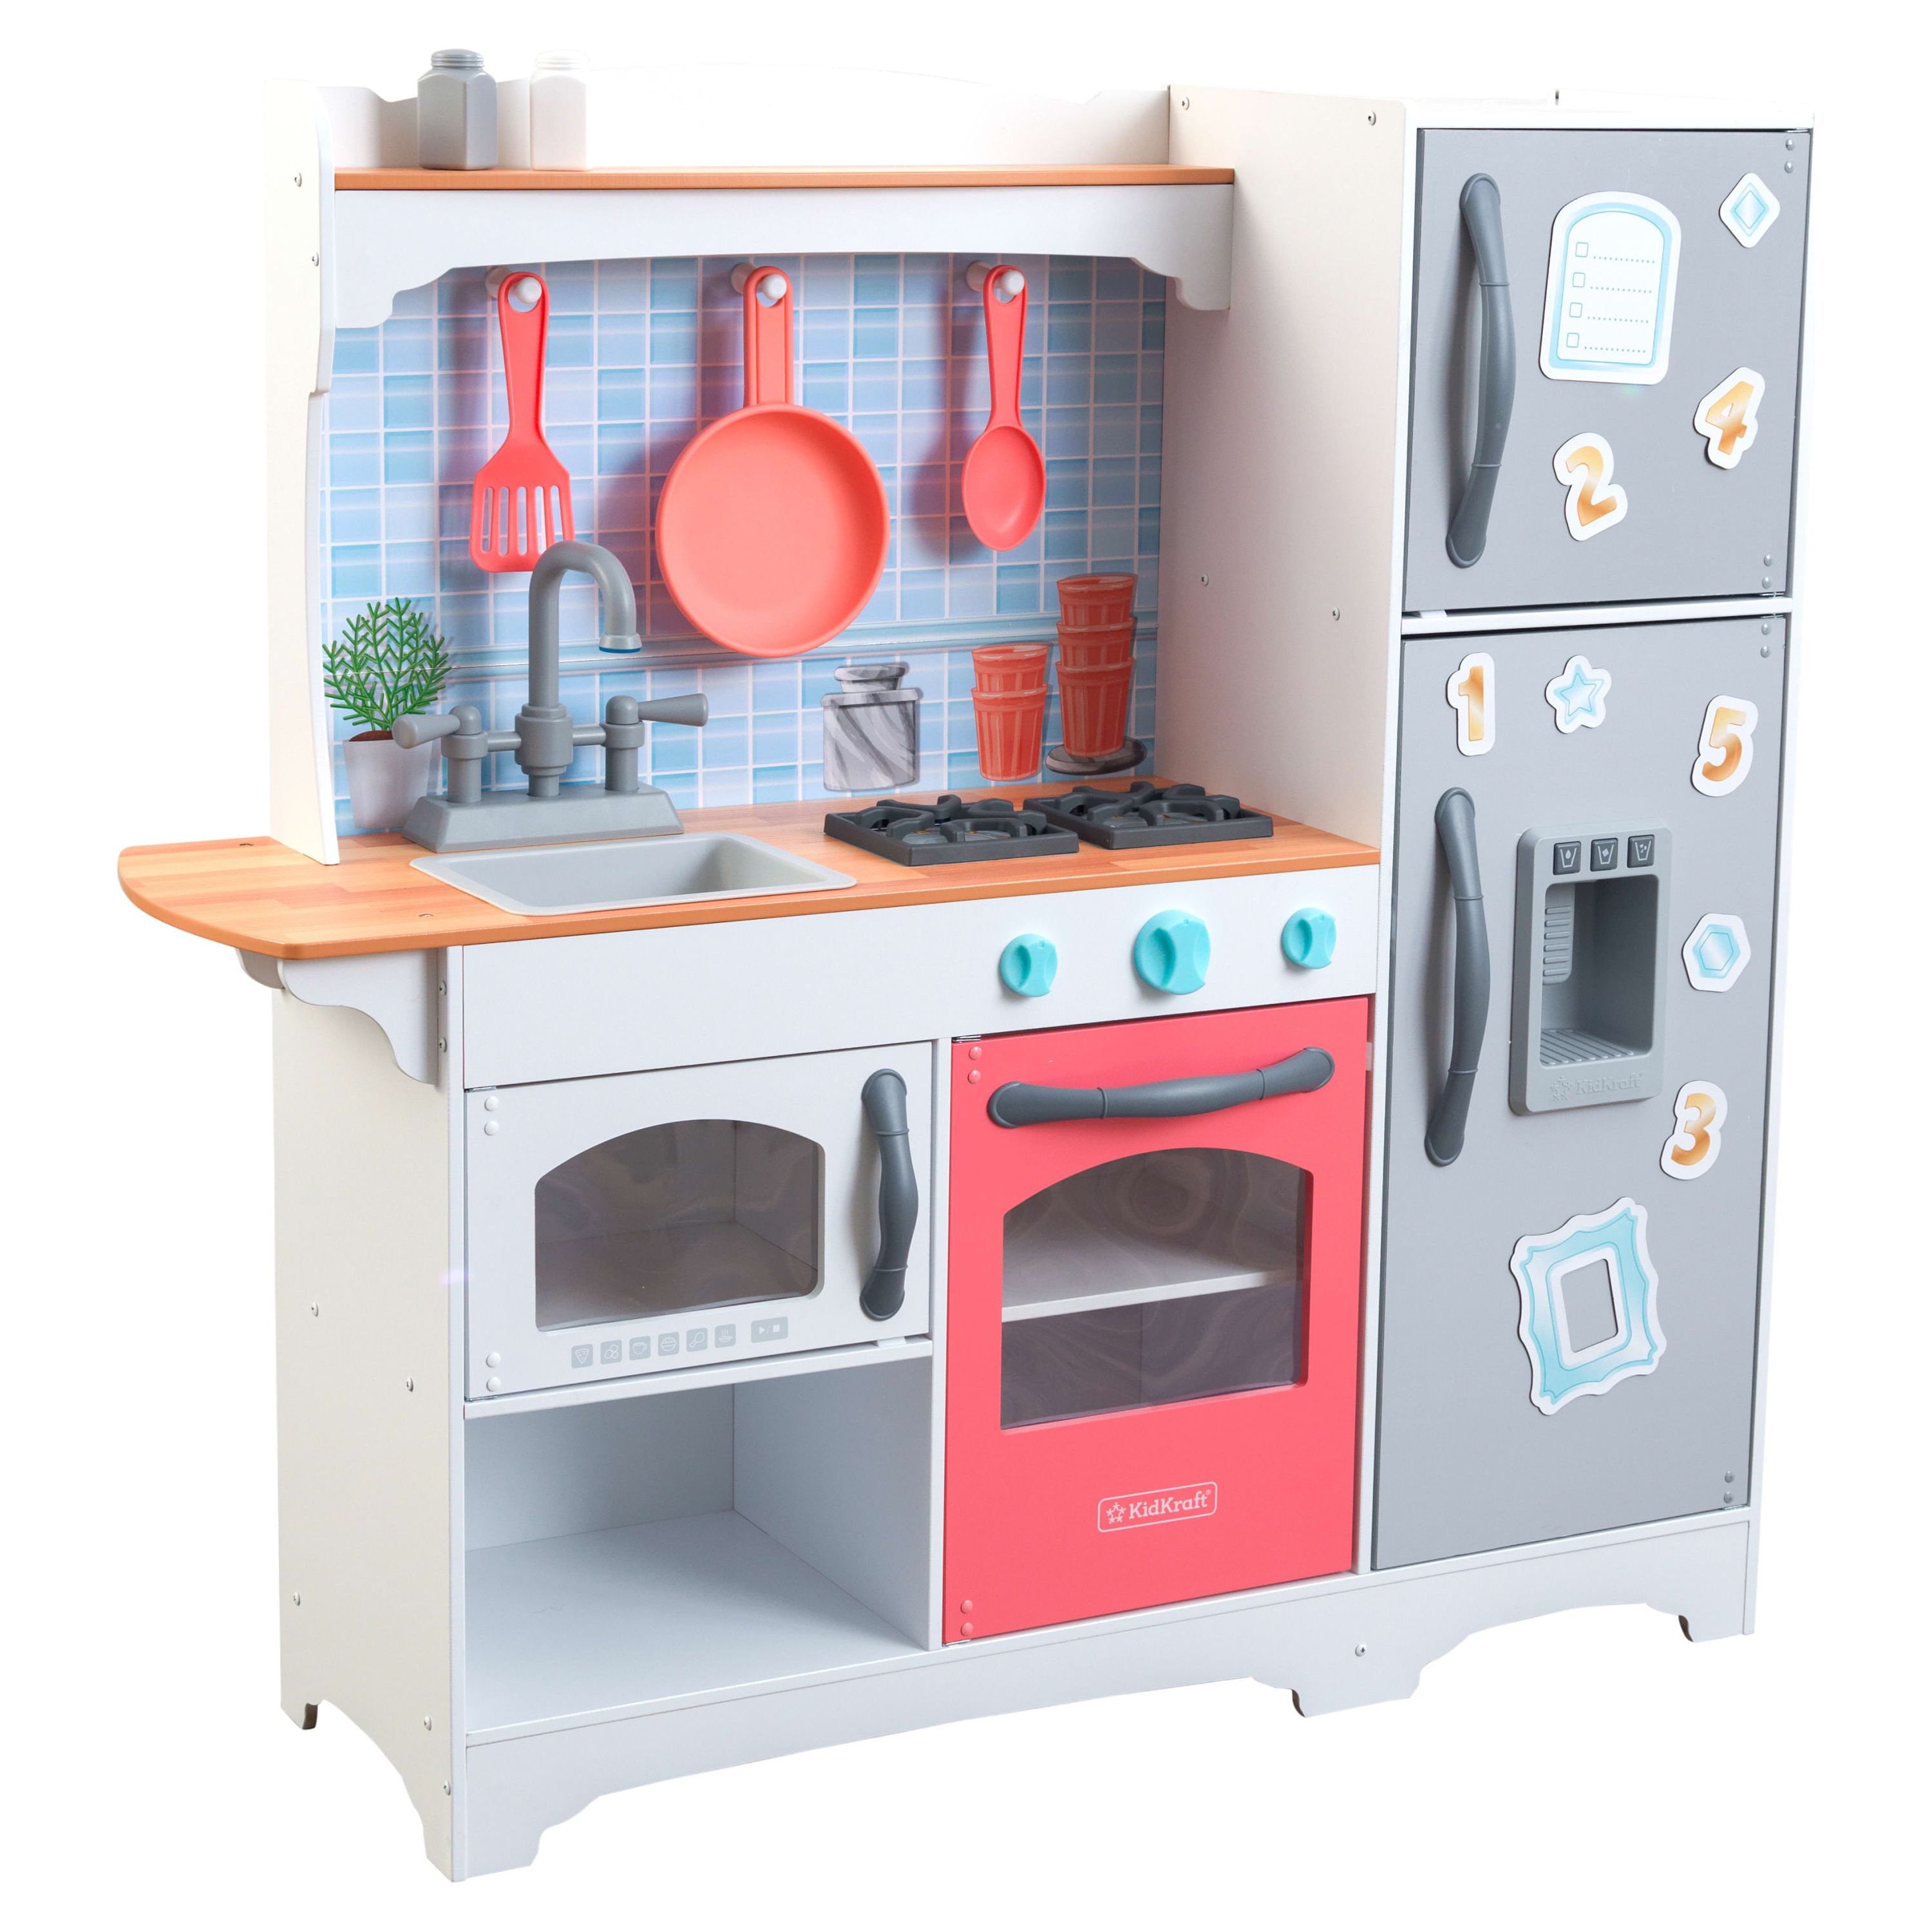 KidKraft Mosaic Magnetic Play Kitchen for Kids, Gray and Pink - image 1 of 12